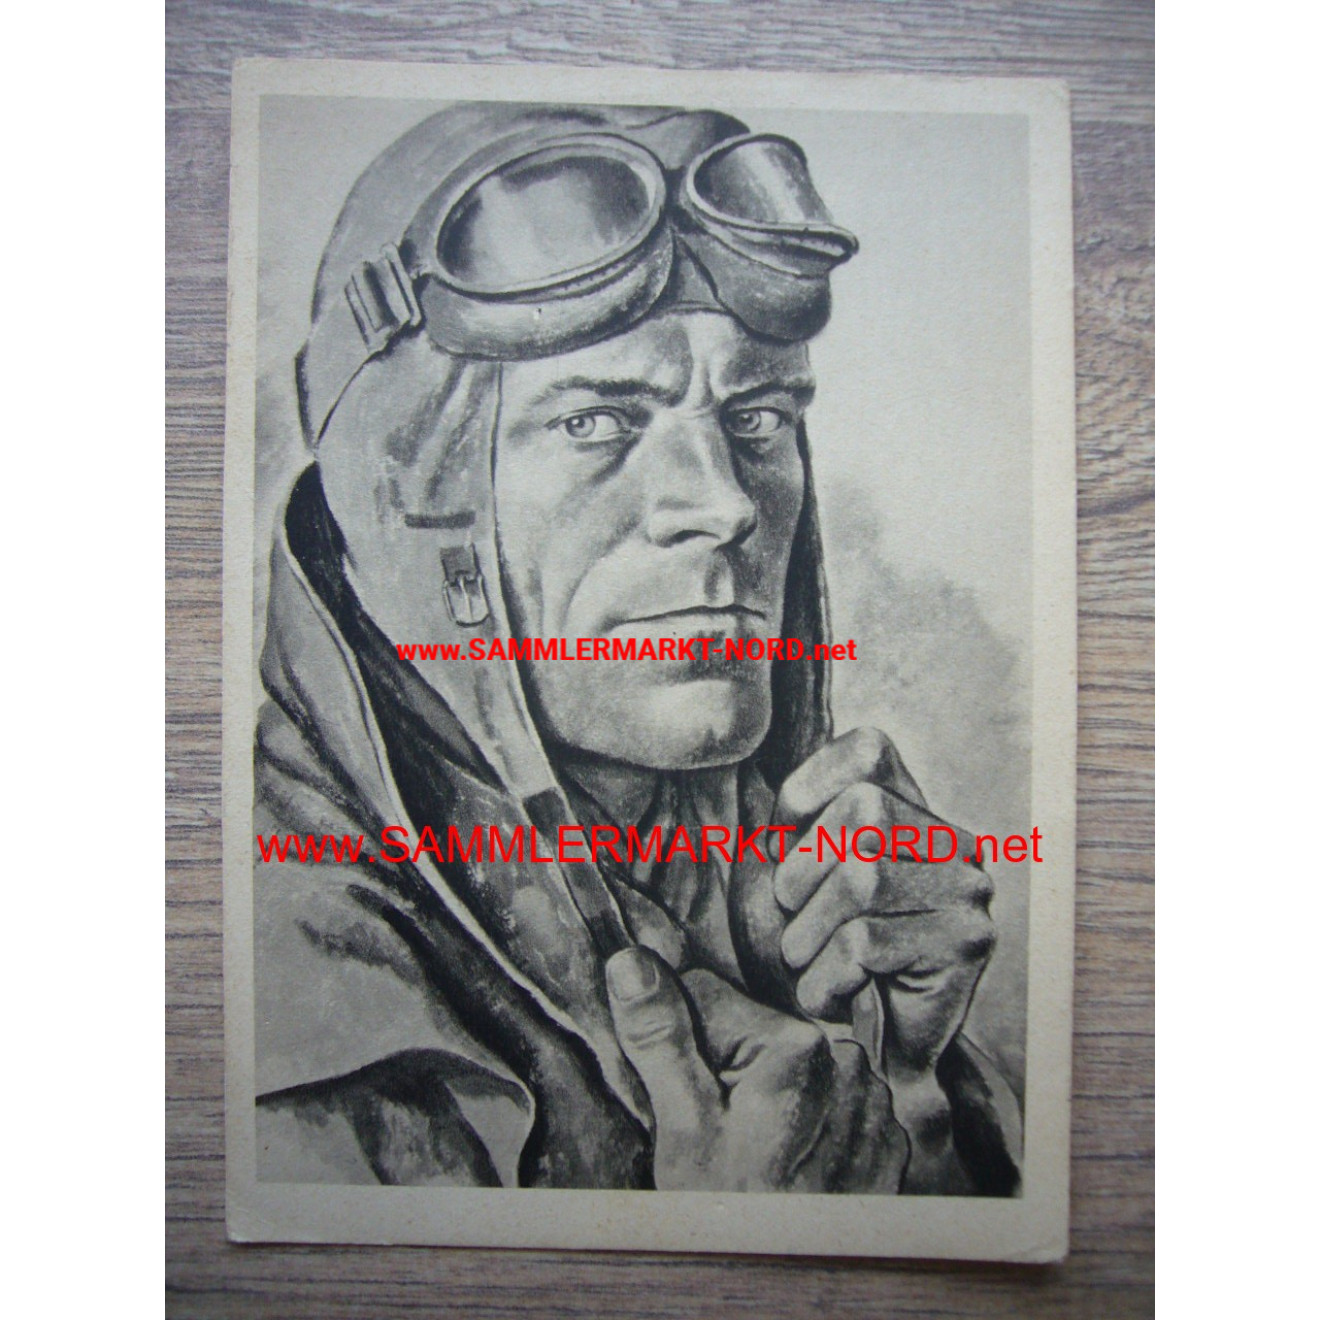 Pilot with a flying hood of the Luftwaffe